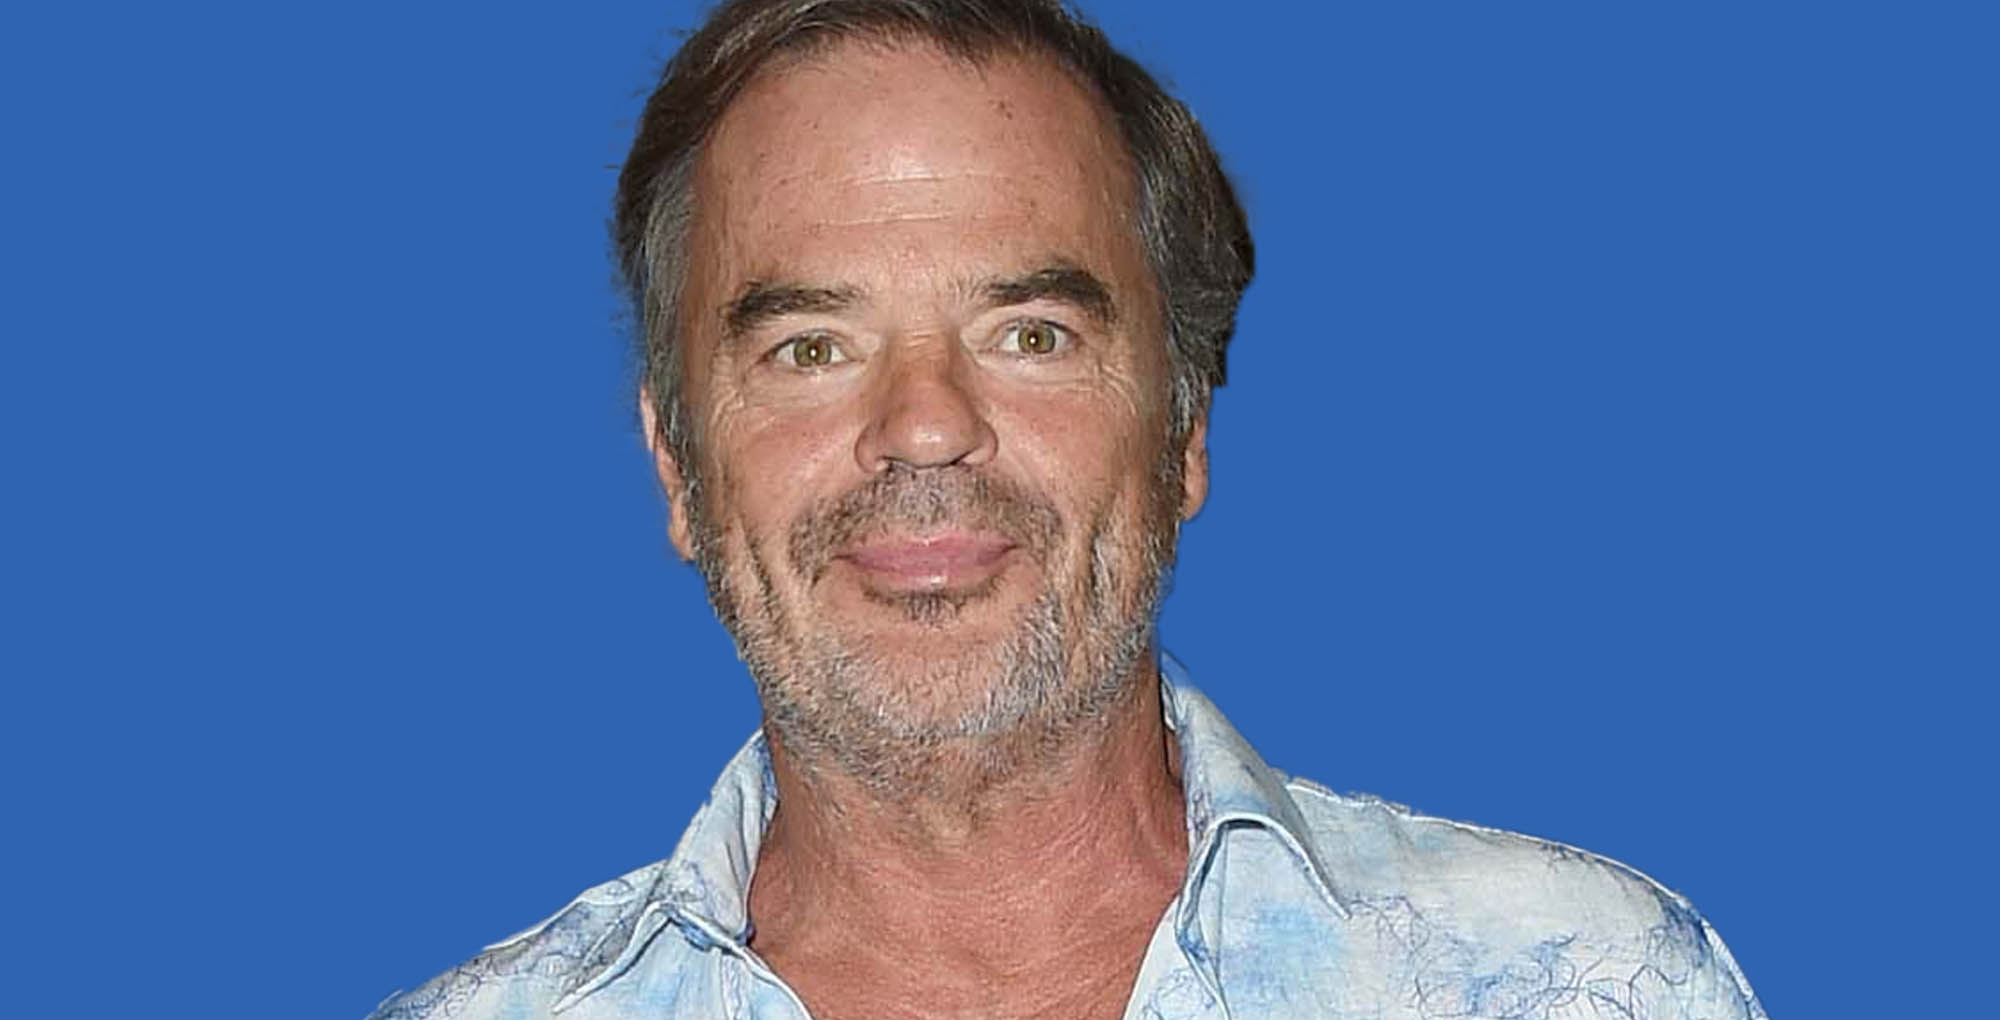 days of our lives and general hospital actor wally kurth celebrates his birthday.